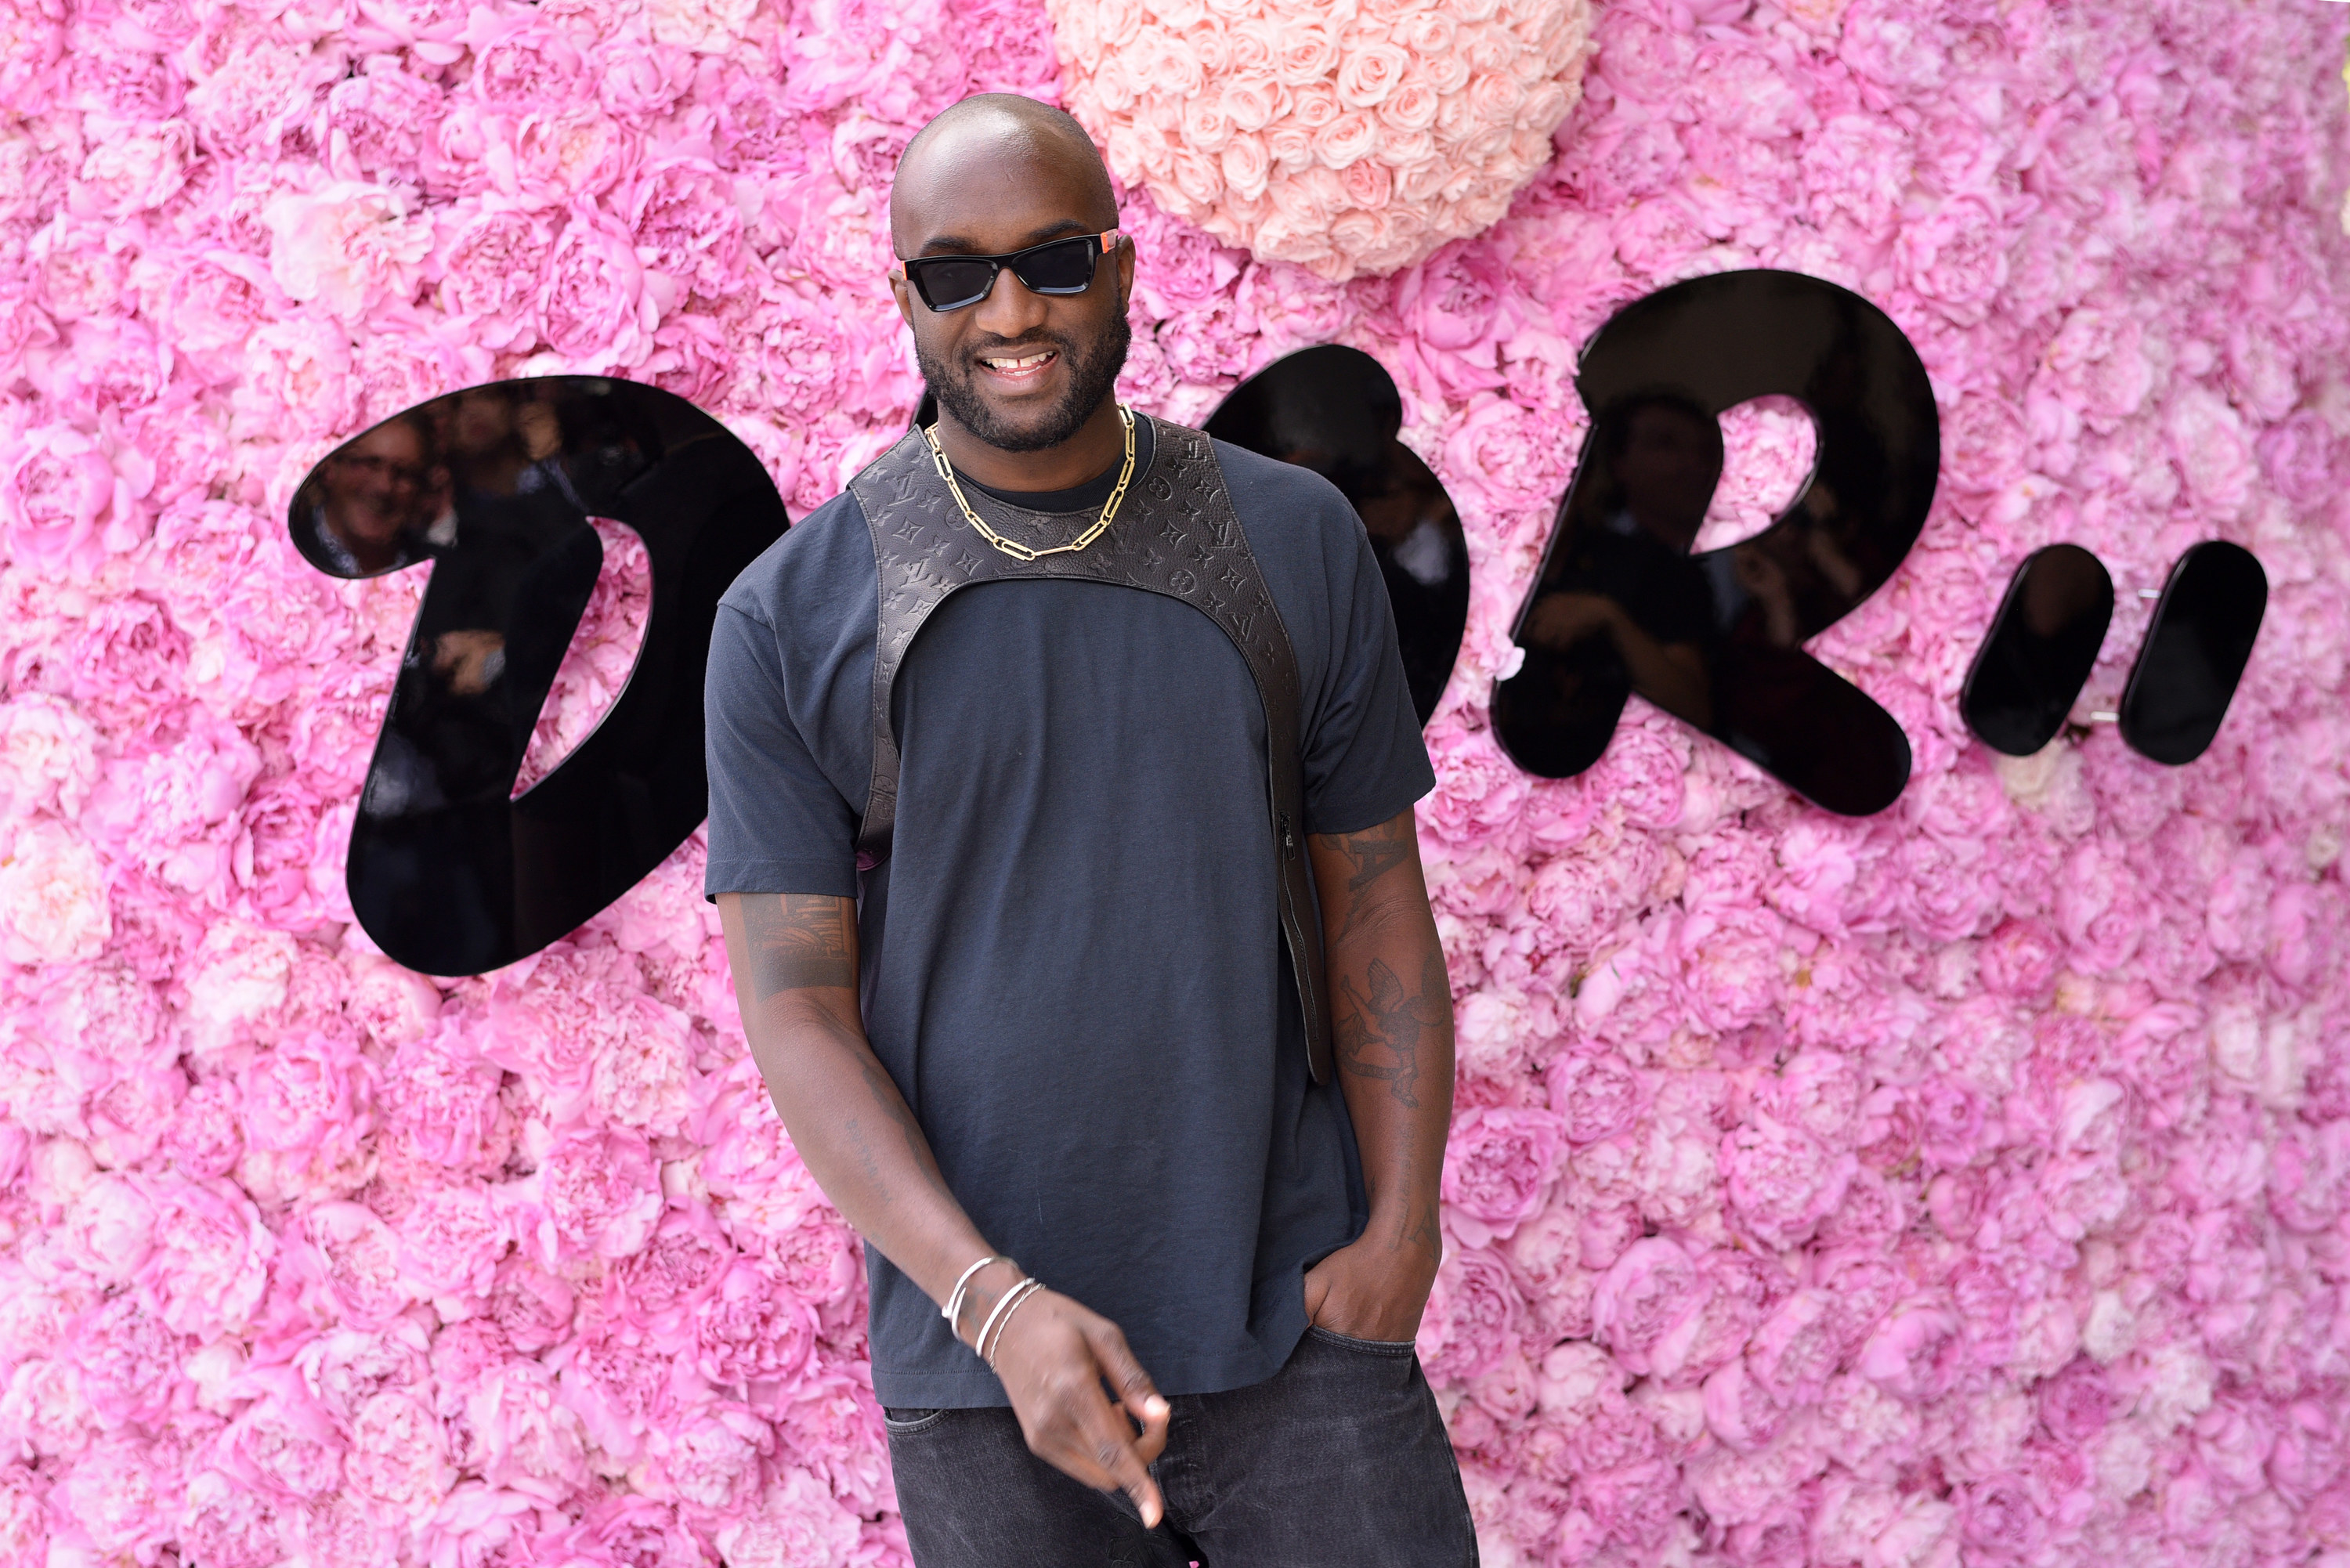 Why Is Everyone Roasting Virgil Abloh? The Designer's Donation Has Caused  Some Ire